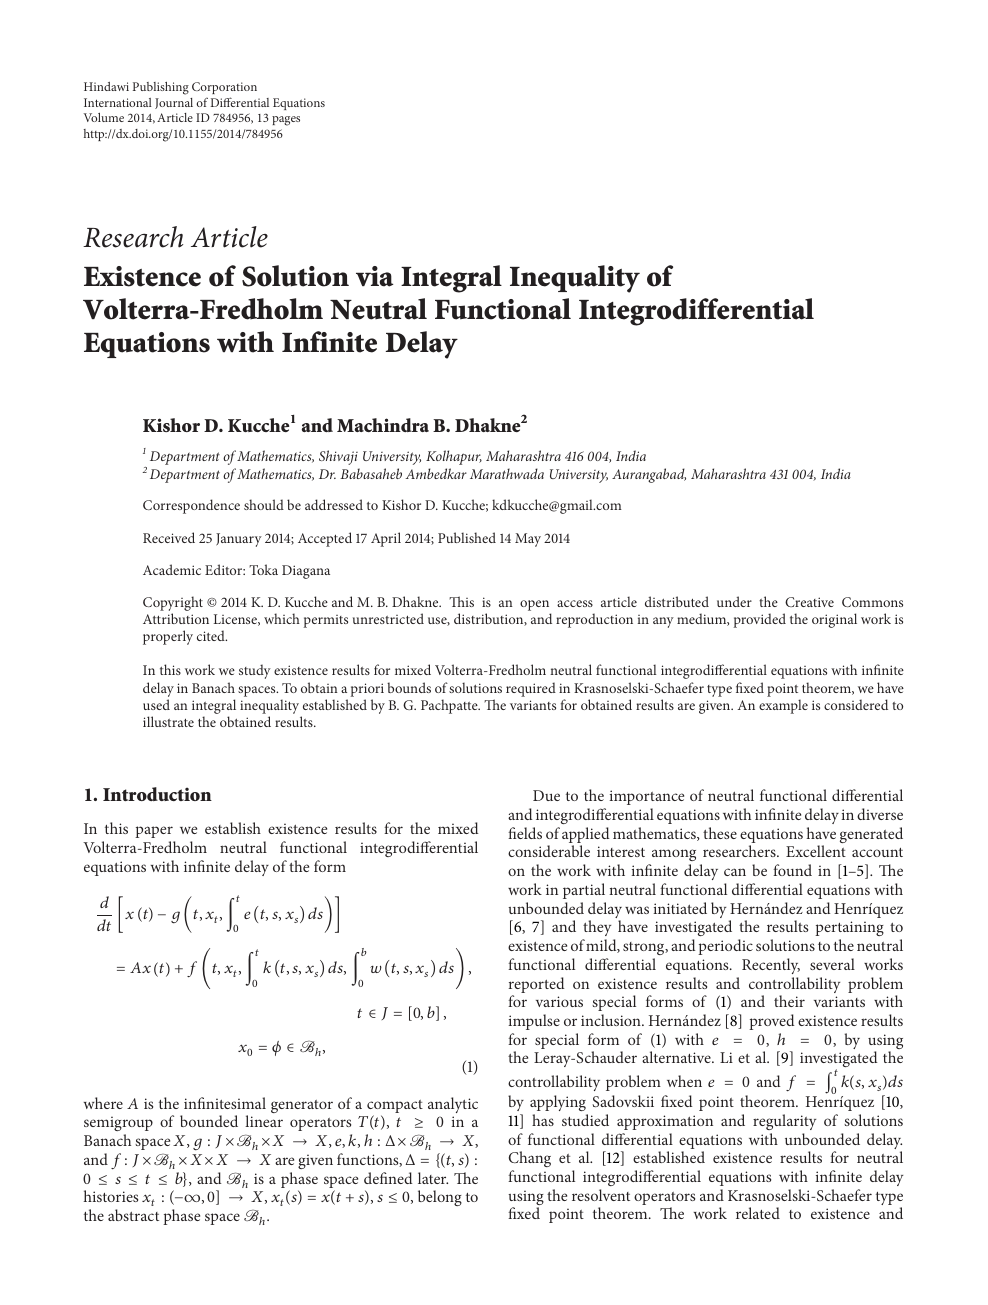 Existence Of Solution Via Integral Inequality Of Volterra Fredholm Neutral Functional Integrodifferential Equations With Infinite Delay Topic Of Research Paper In Mathematics Download Scholarly Article Pdf And Read For Free On Cyberleninka